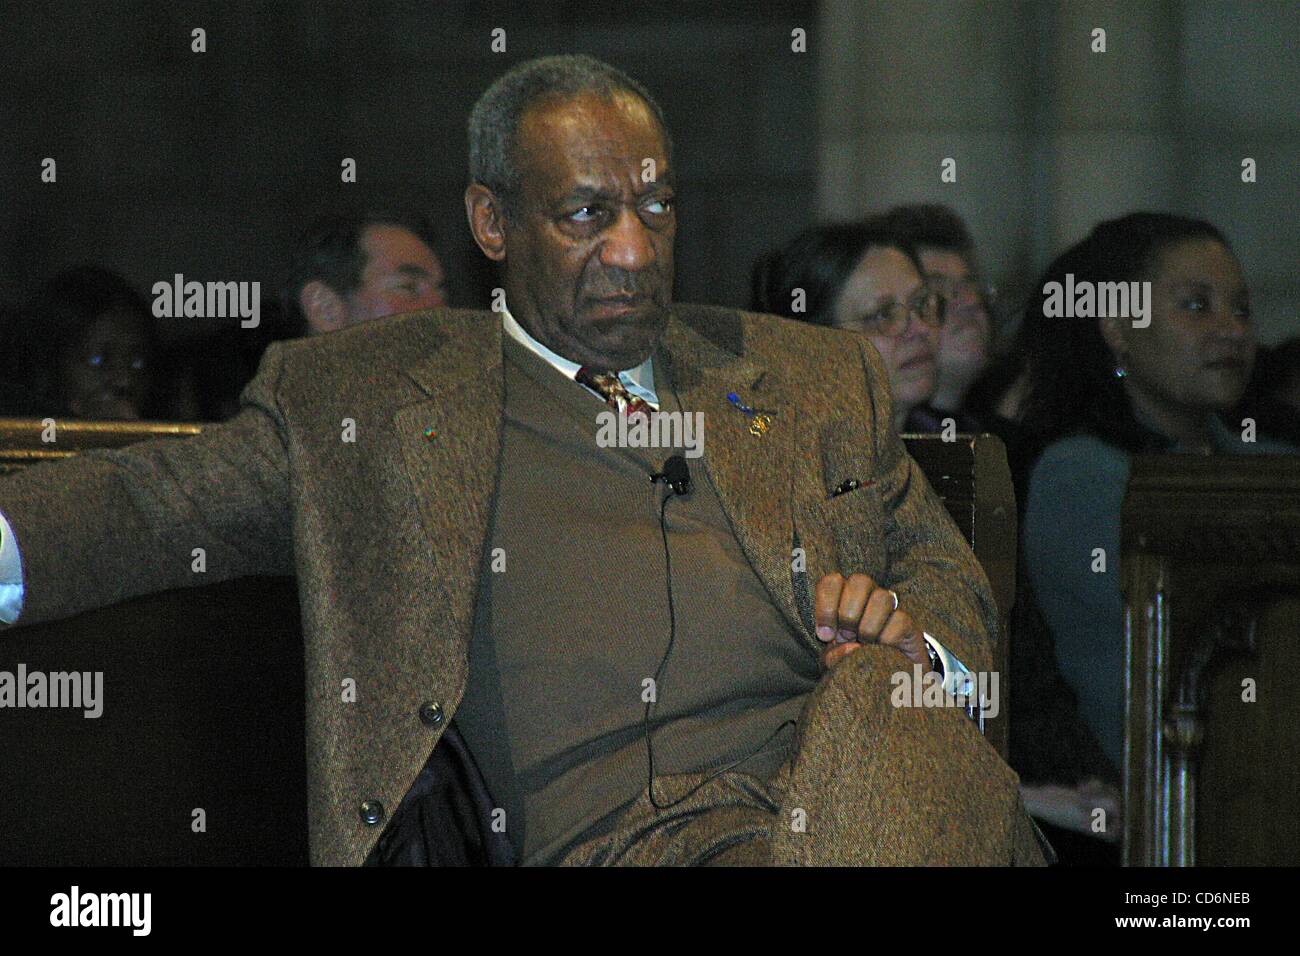 Feb. 2, 2004 - New York, New York, U.S. - K35226RM.''A CONVERSATION WITH COSBY'' TEACHERS COLLEGE AND REGION 10 COLLABERATIVE COMMEMORATION OF BROWN VS. TOPEKA BOARD OF EDUCATION SUPREME COURT DECISION , NEW YORK New York .02/02/2004.  /     2004..BILL COSBY(Credit Image: Â© Rick Mackler/Globe Photo Stock Photo